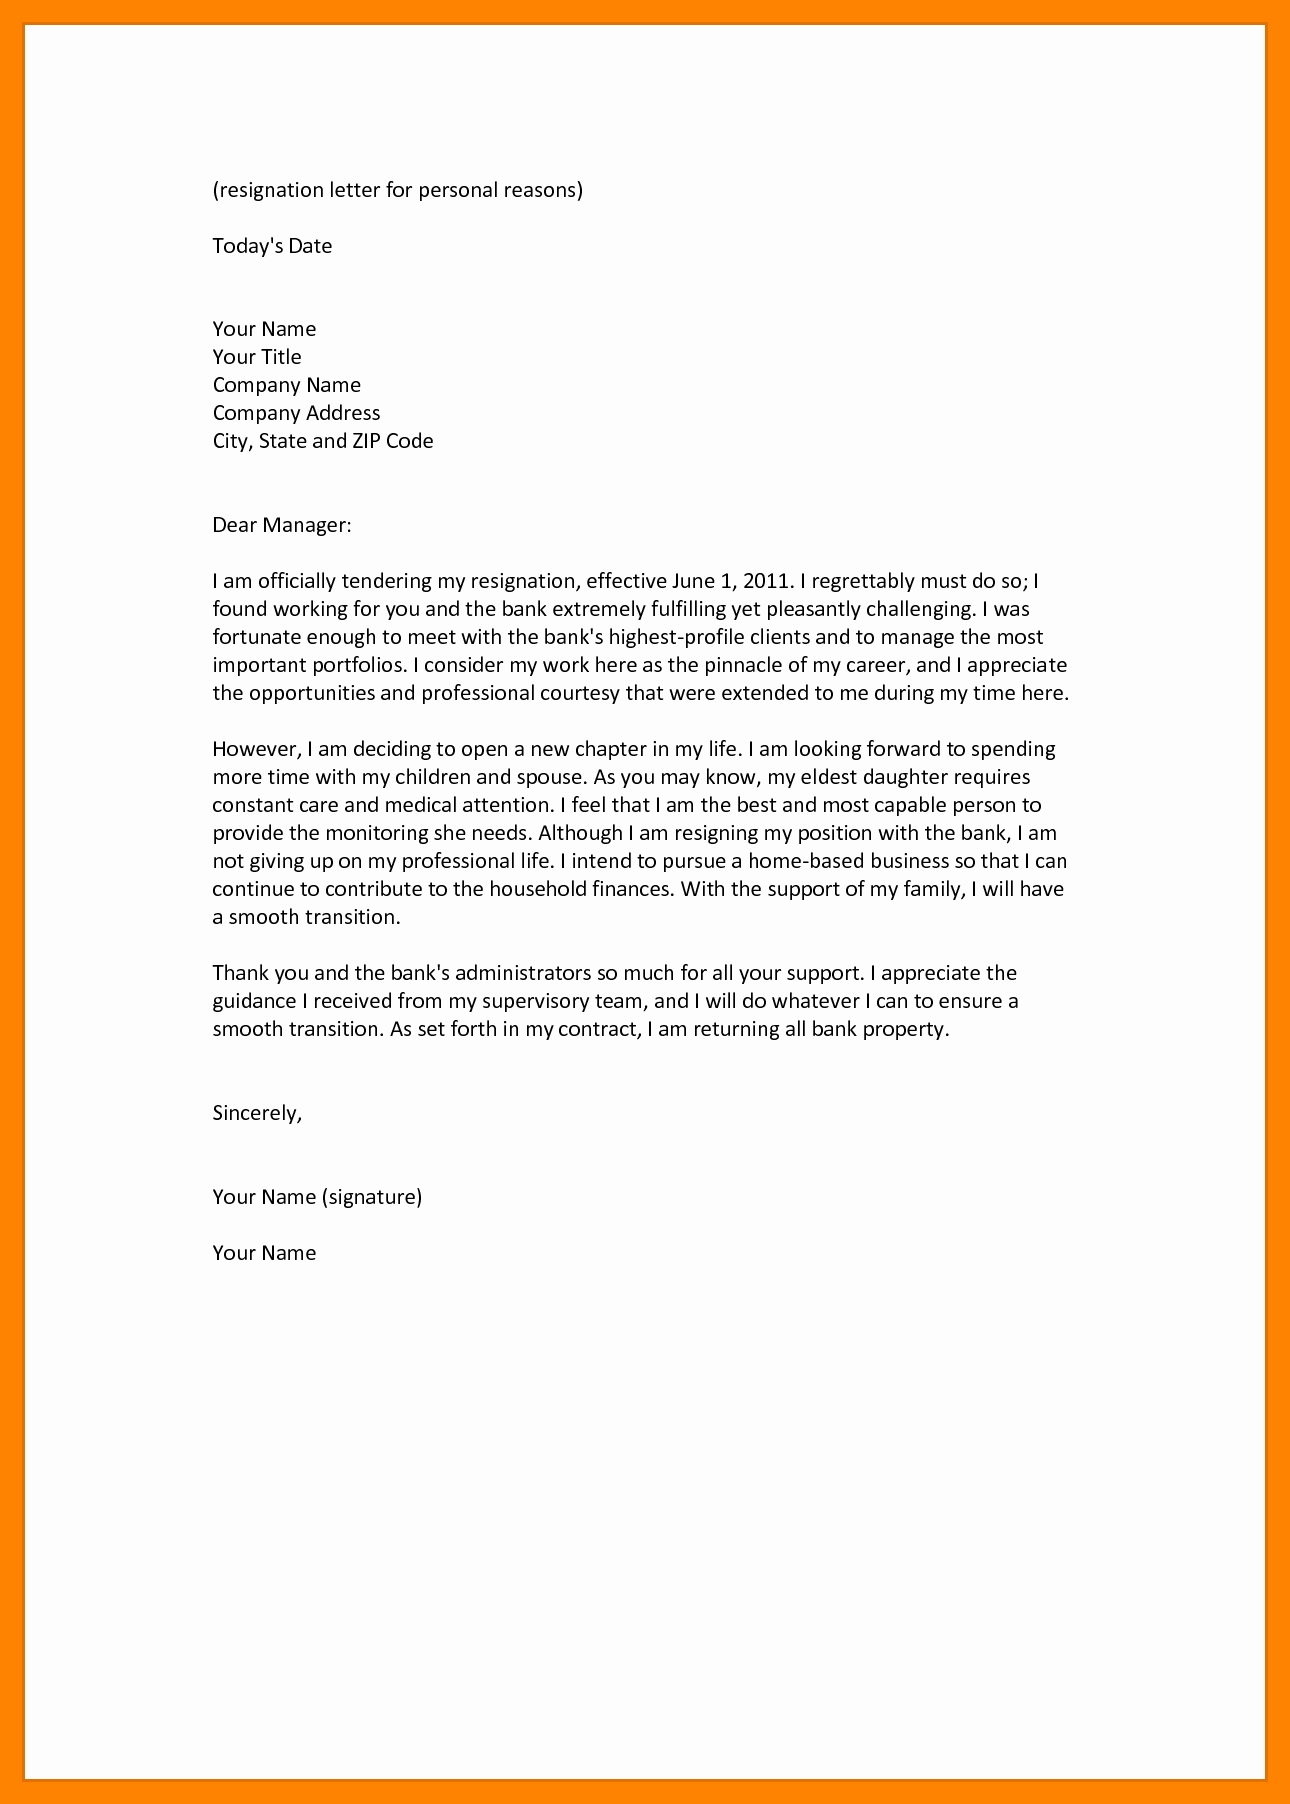 Resignation Letter for Family Reason Awesome 6 Resignation Letter Family Reasons